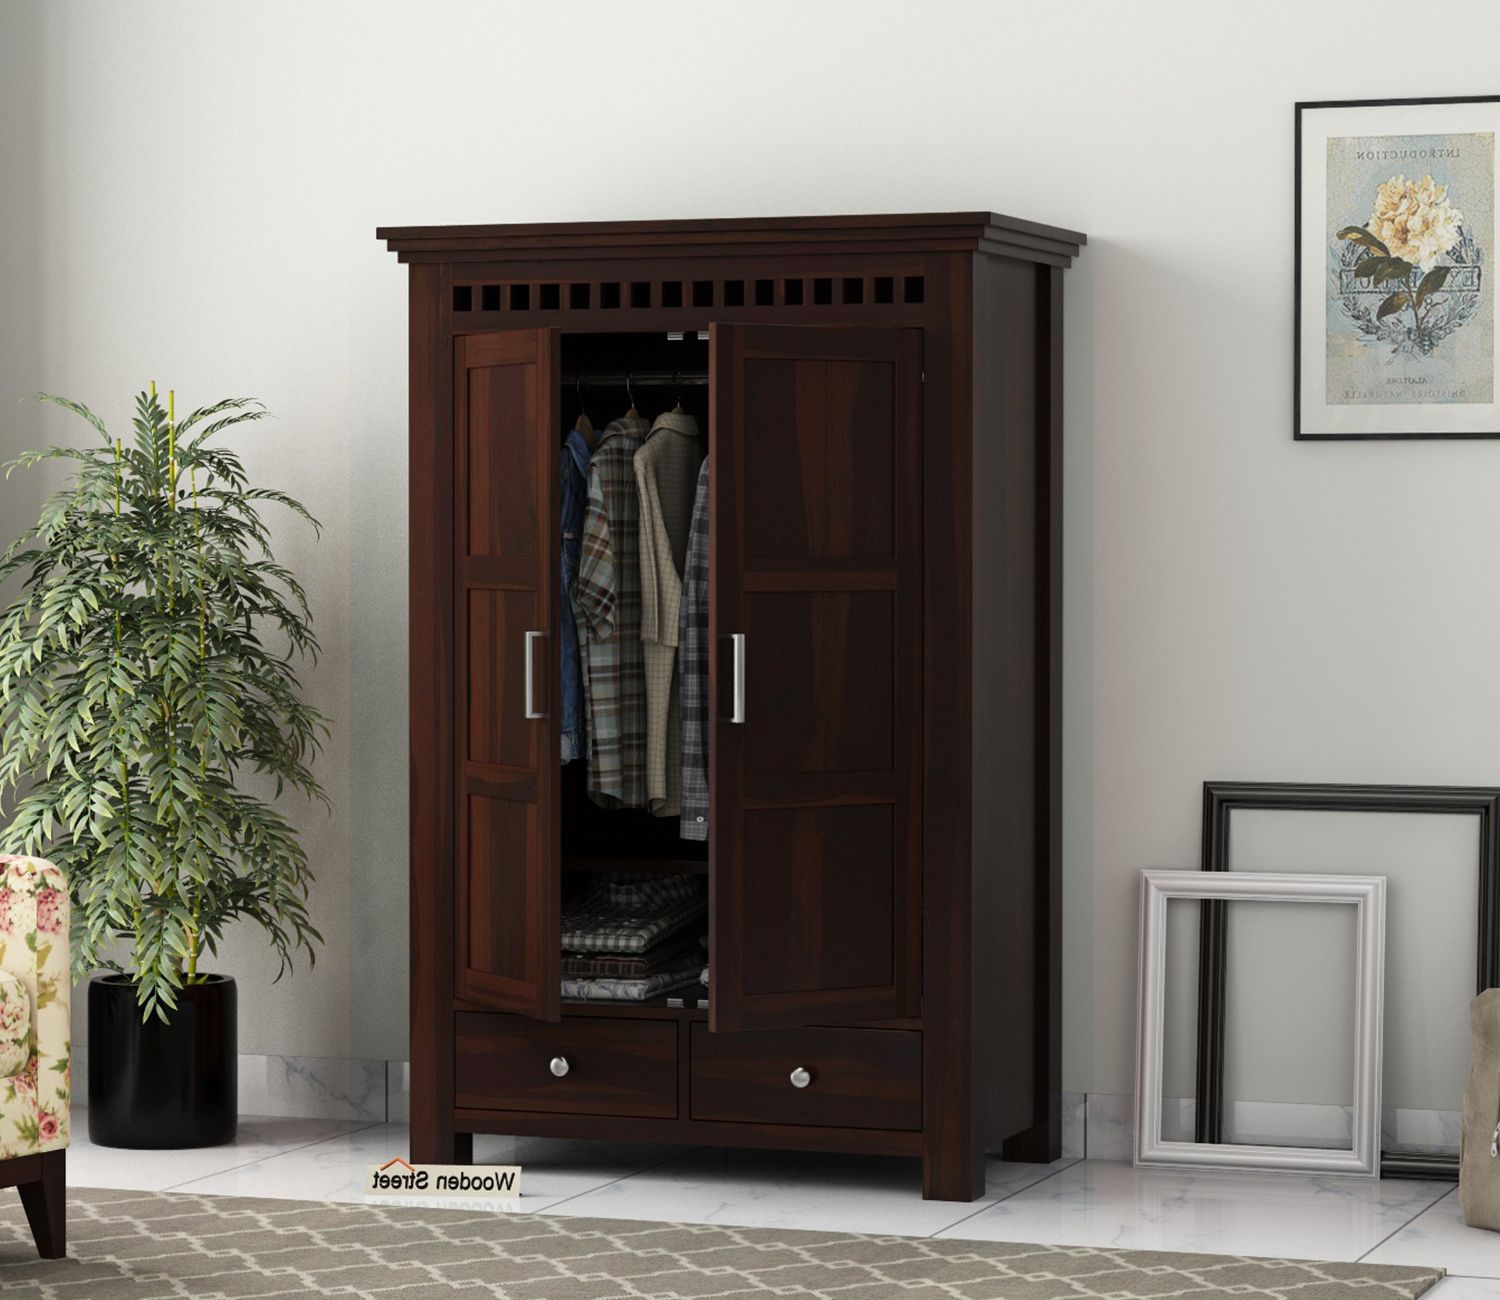 2018 Medium Size Wardrobes Within Buy Adolph Medium Size Wardrobe (walnut Finish) Online In India At Best  Price – Modern Wardrobes – Bedroom Cabinets – Storage Furniture – Furniture  – Wooden Street Product (View 2 of 10)